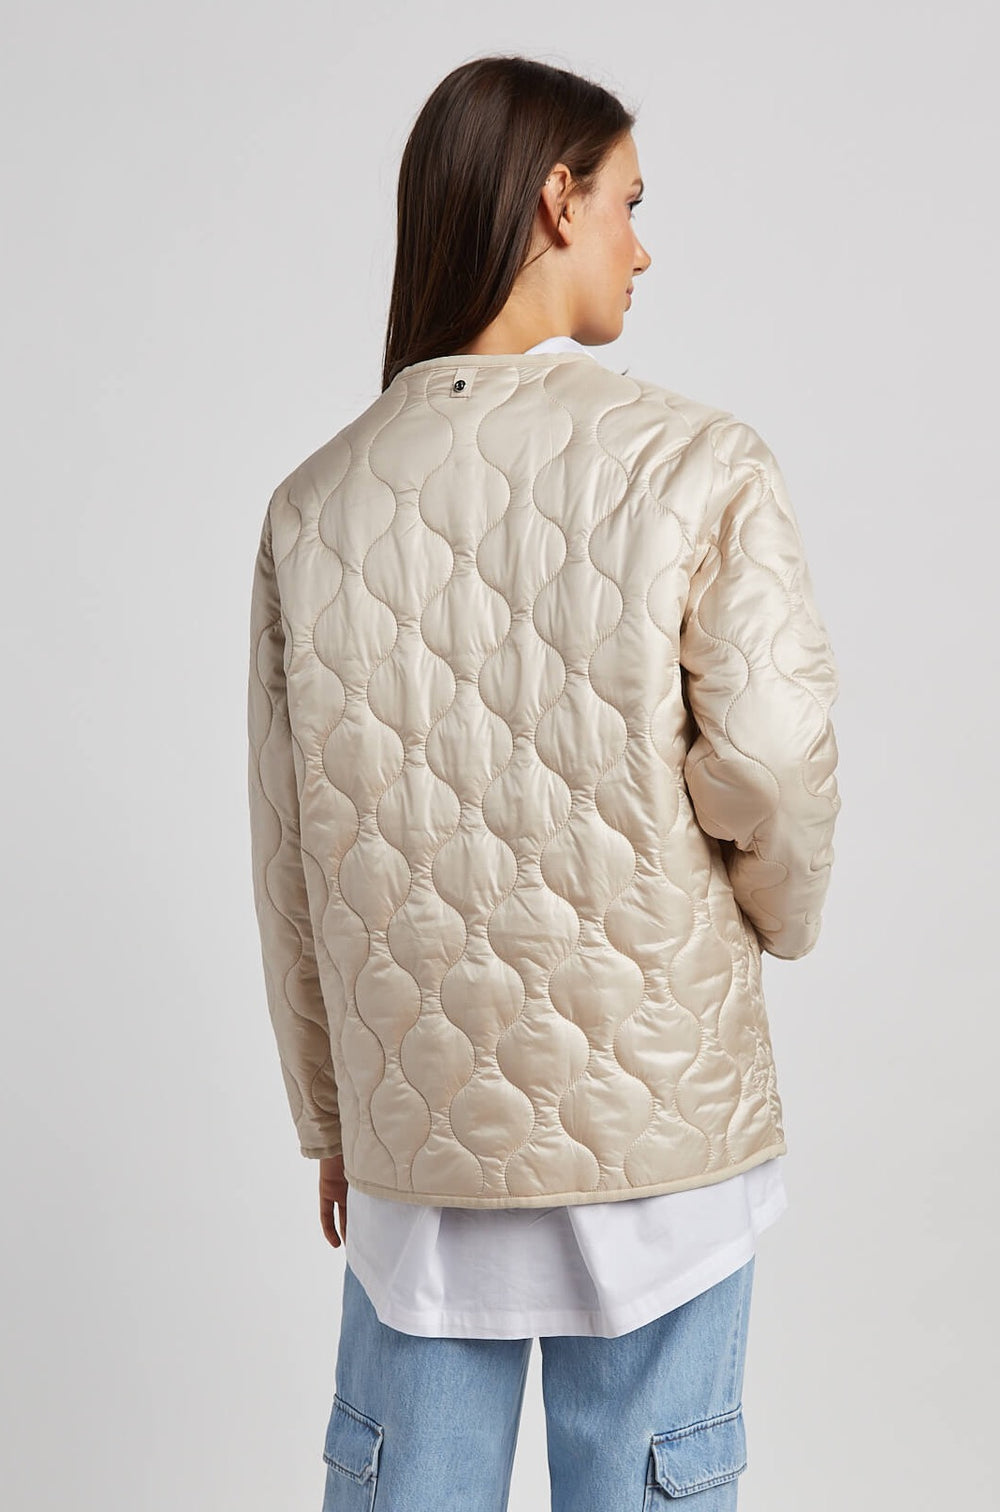 Pina Quilted Short Jacket - Champagne